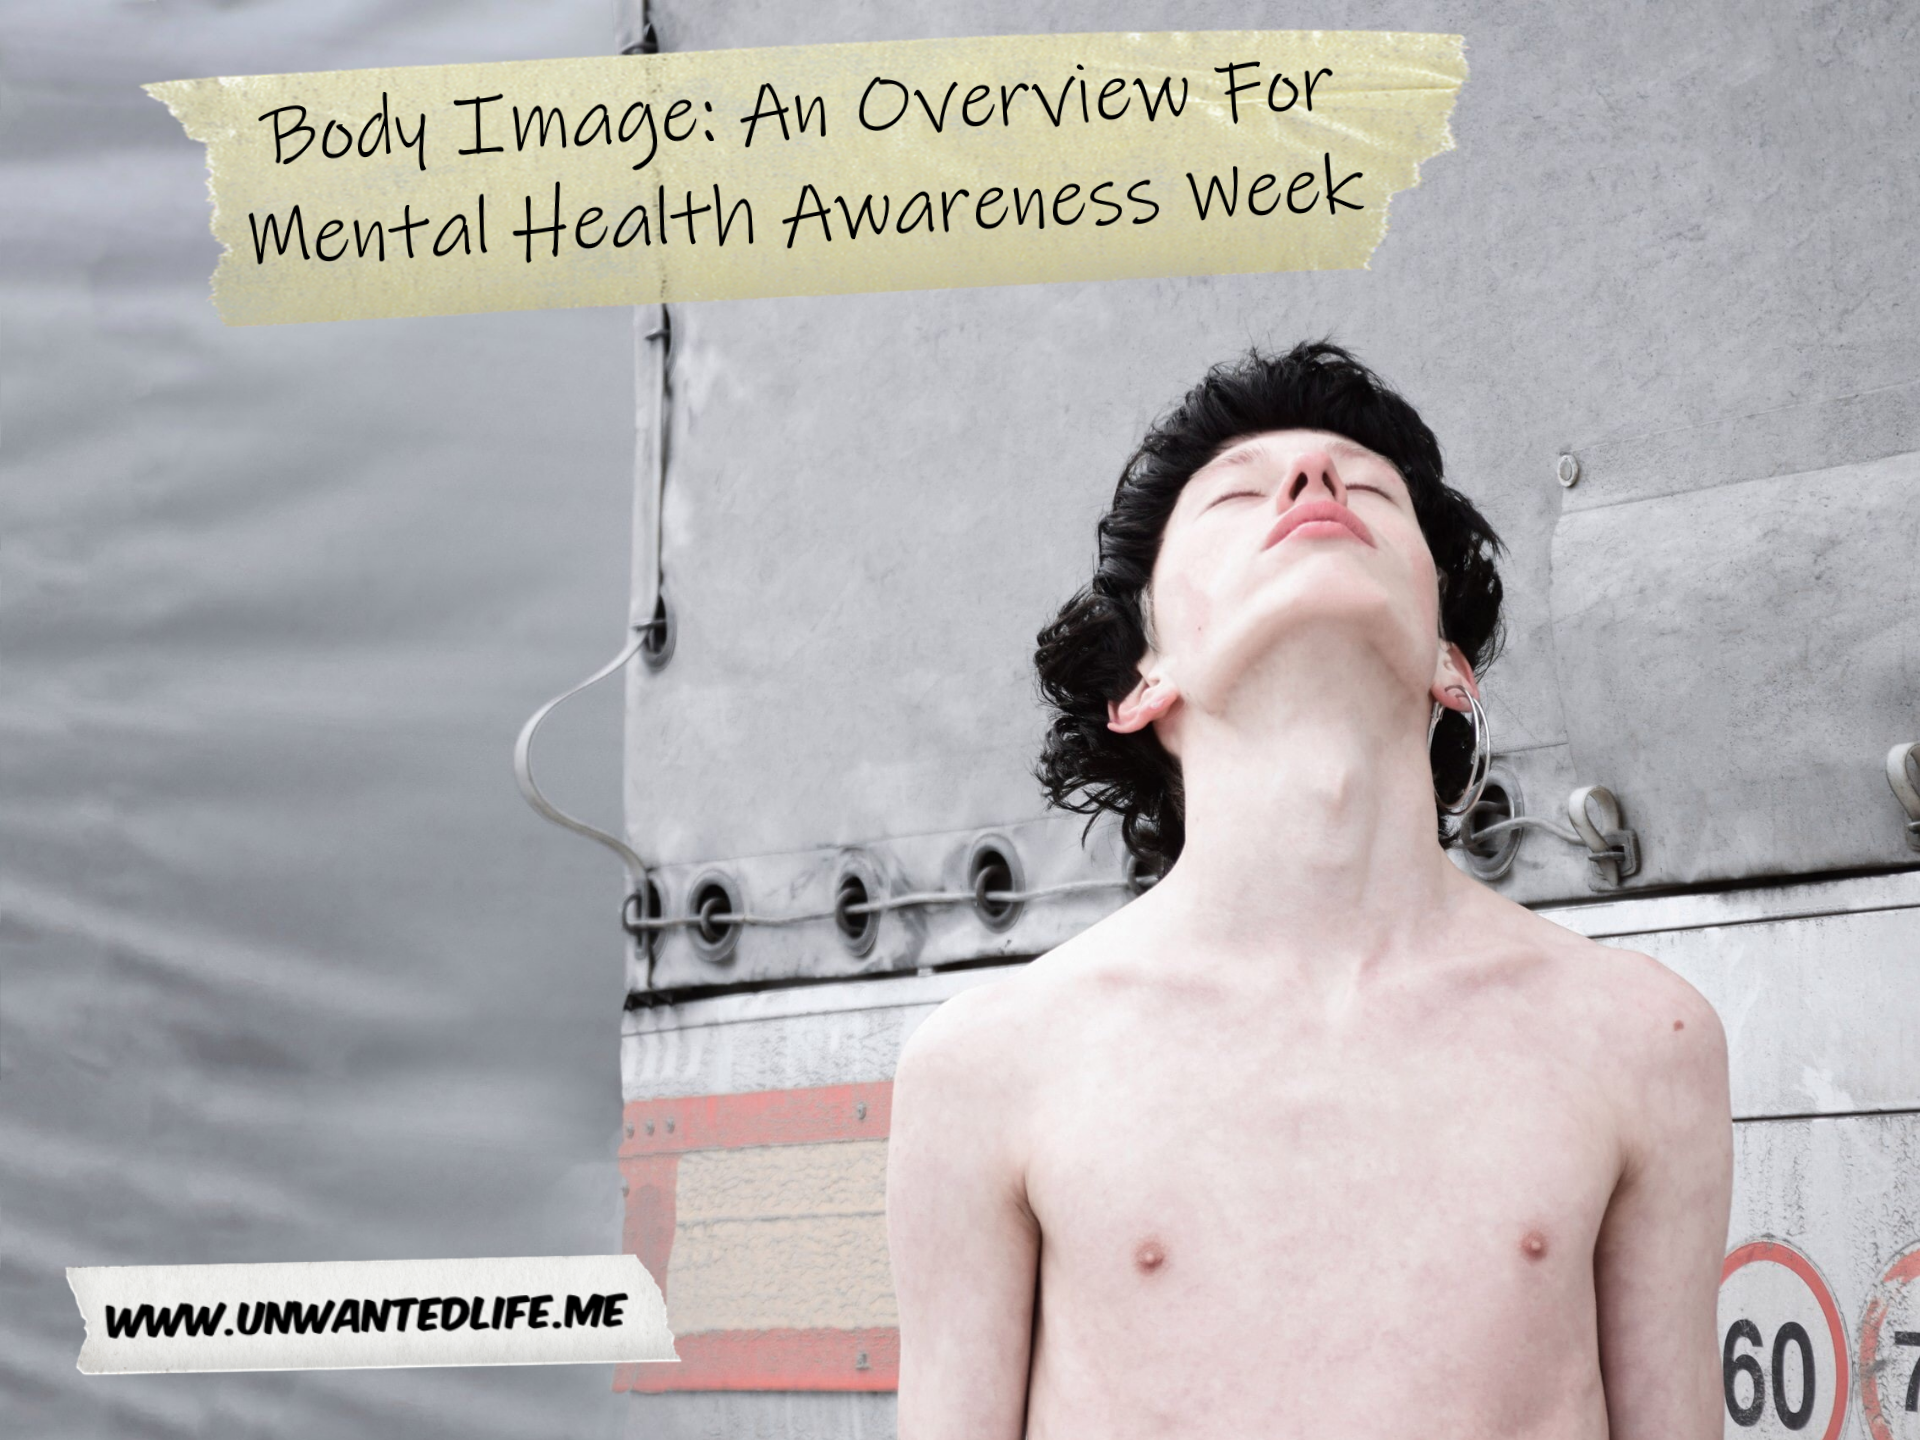 A photo of a skinny white man standing behind a lorry with the title of the article - Body Image: An Overview For Mental Health Awareness Week - across the top of the photo